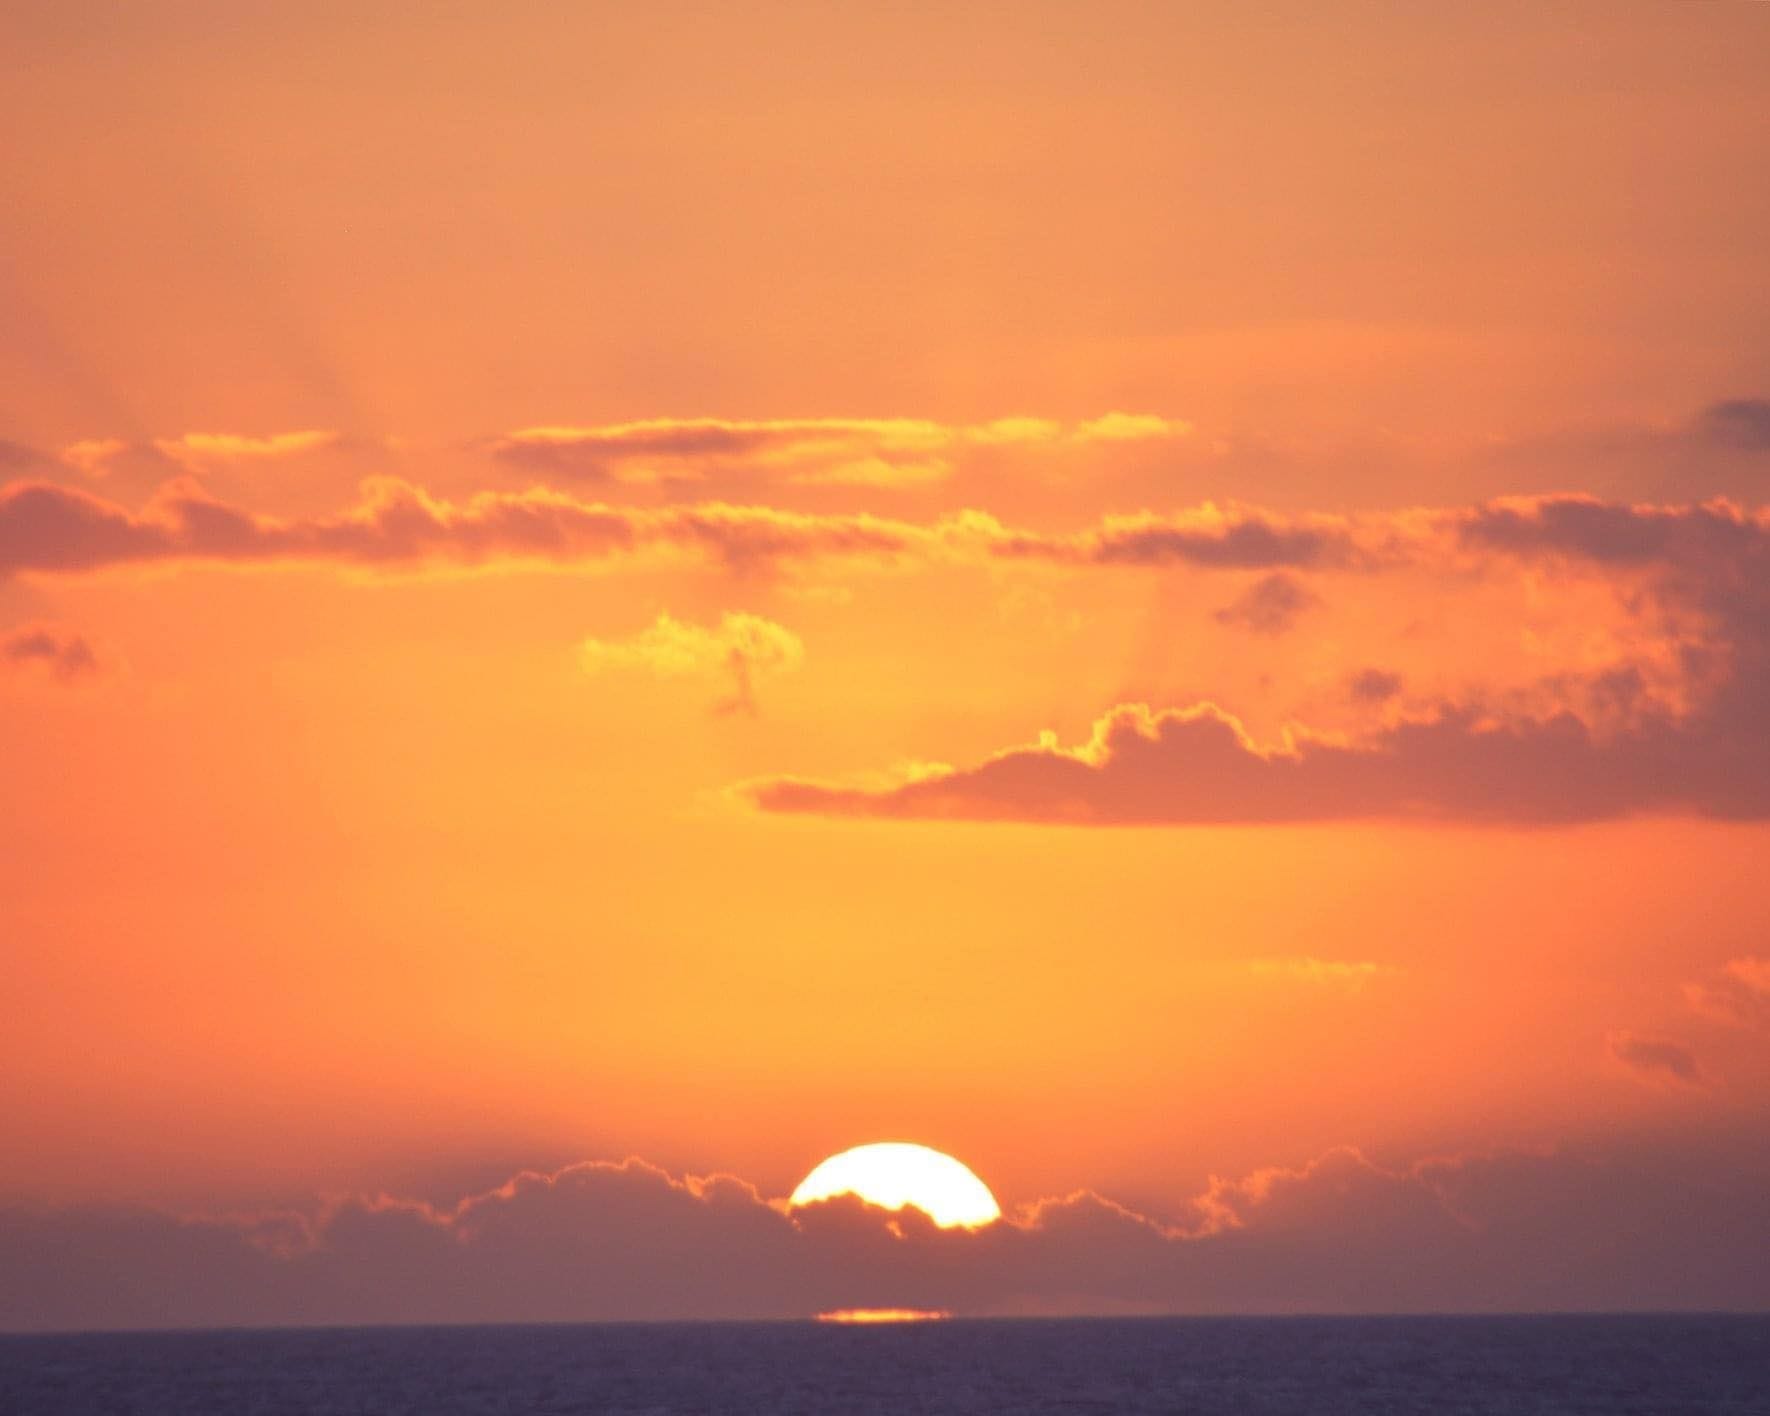 Traveling Photography. Photography by Angel C. at Tylerstar Productions. The sun setting over the Carribean Sea.